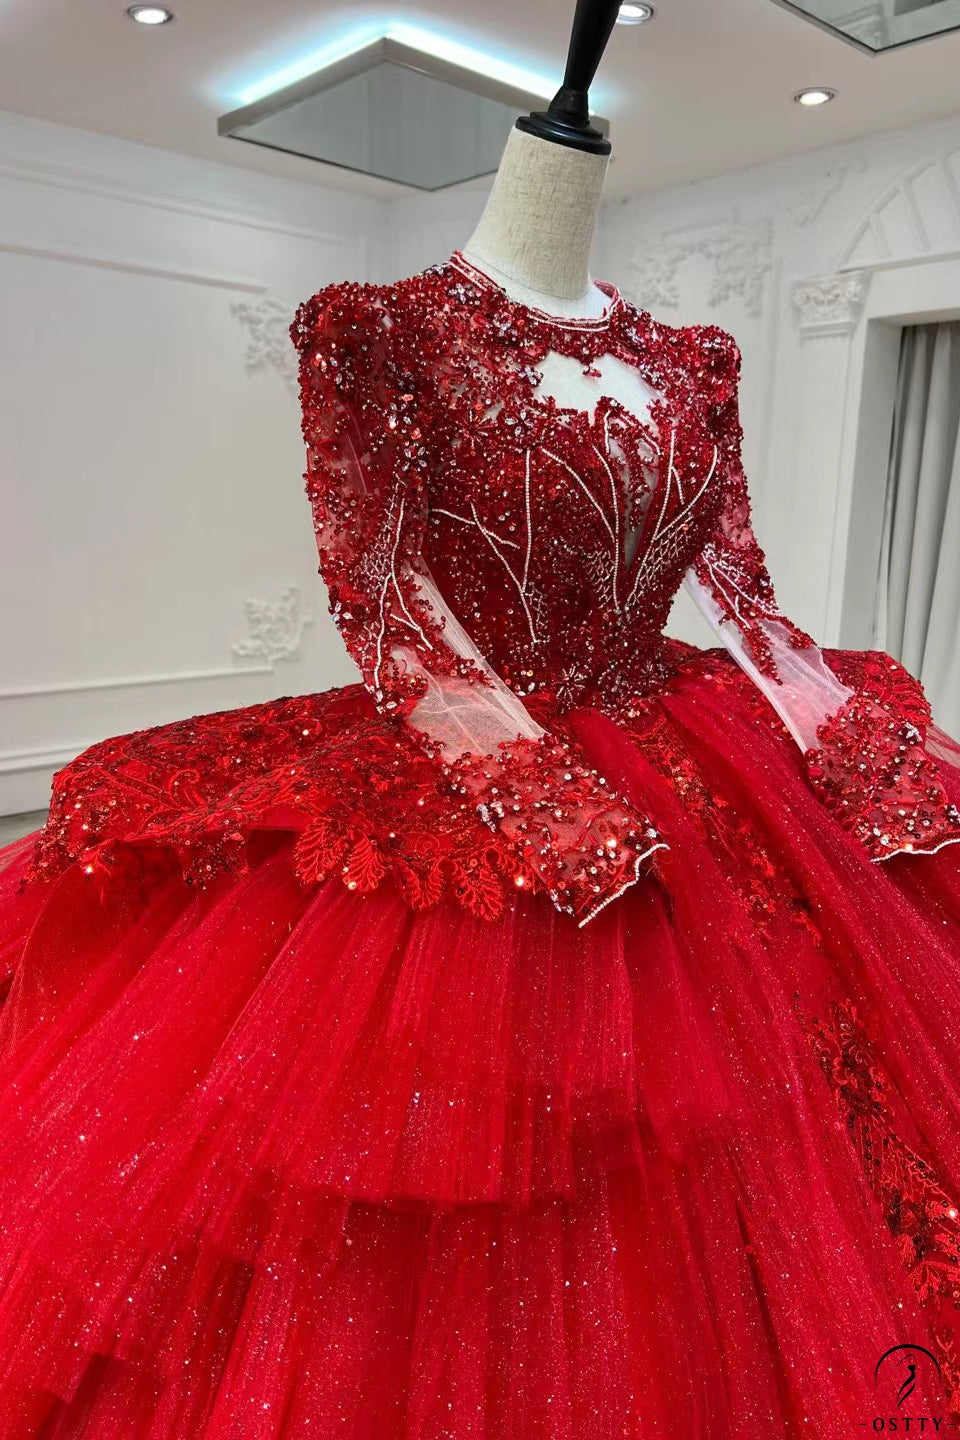 Lace Tulle Long Prom Dress,red Evening Dress,long Sleeve Ball Gown ,off  Shoulder Wedding Dress on Luulla